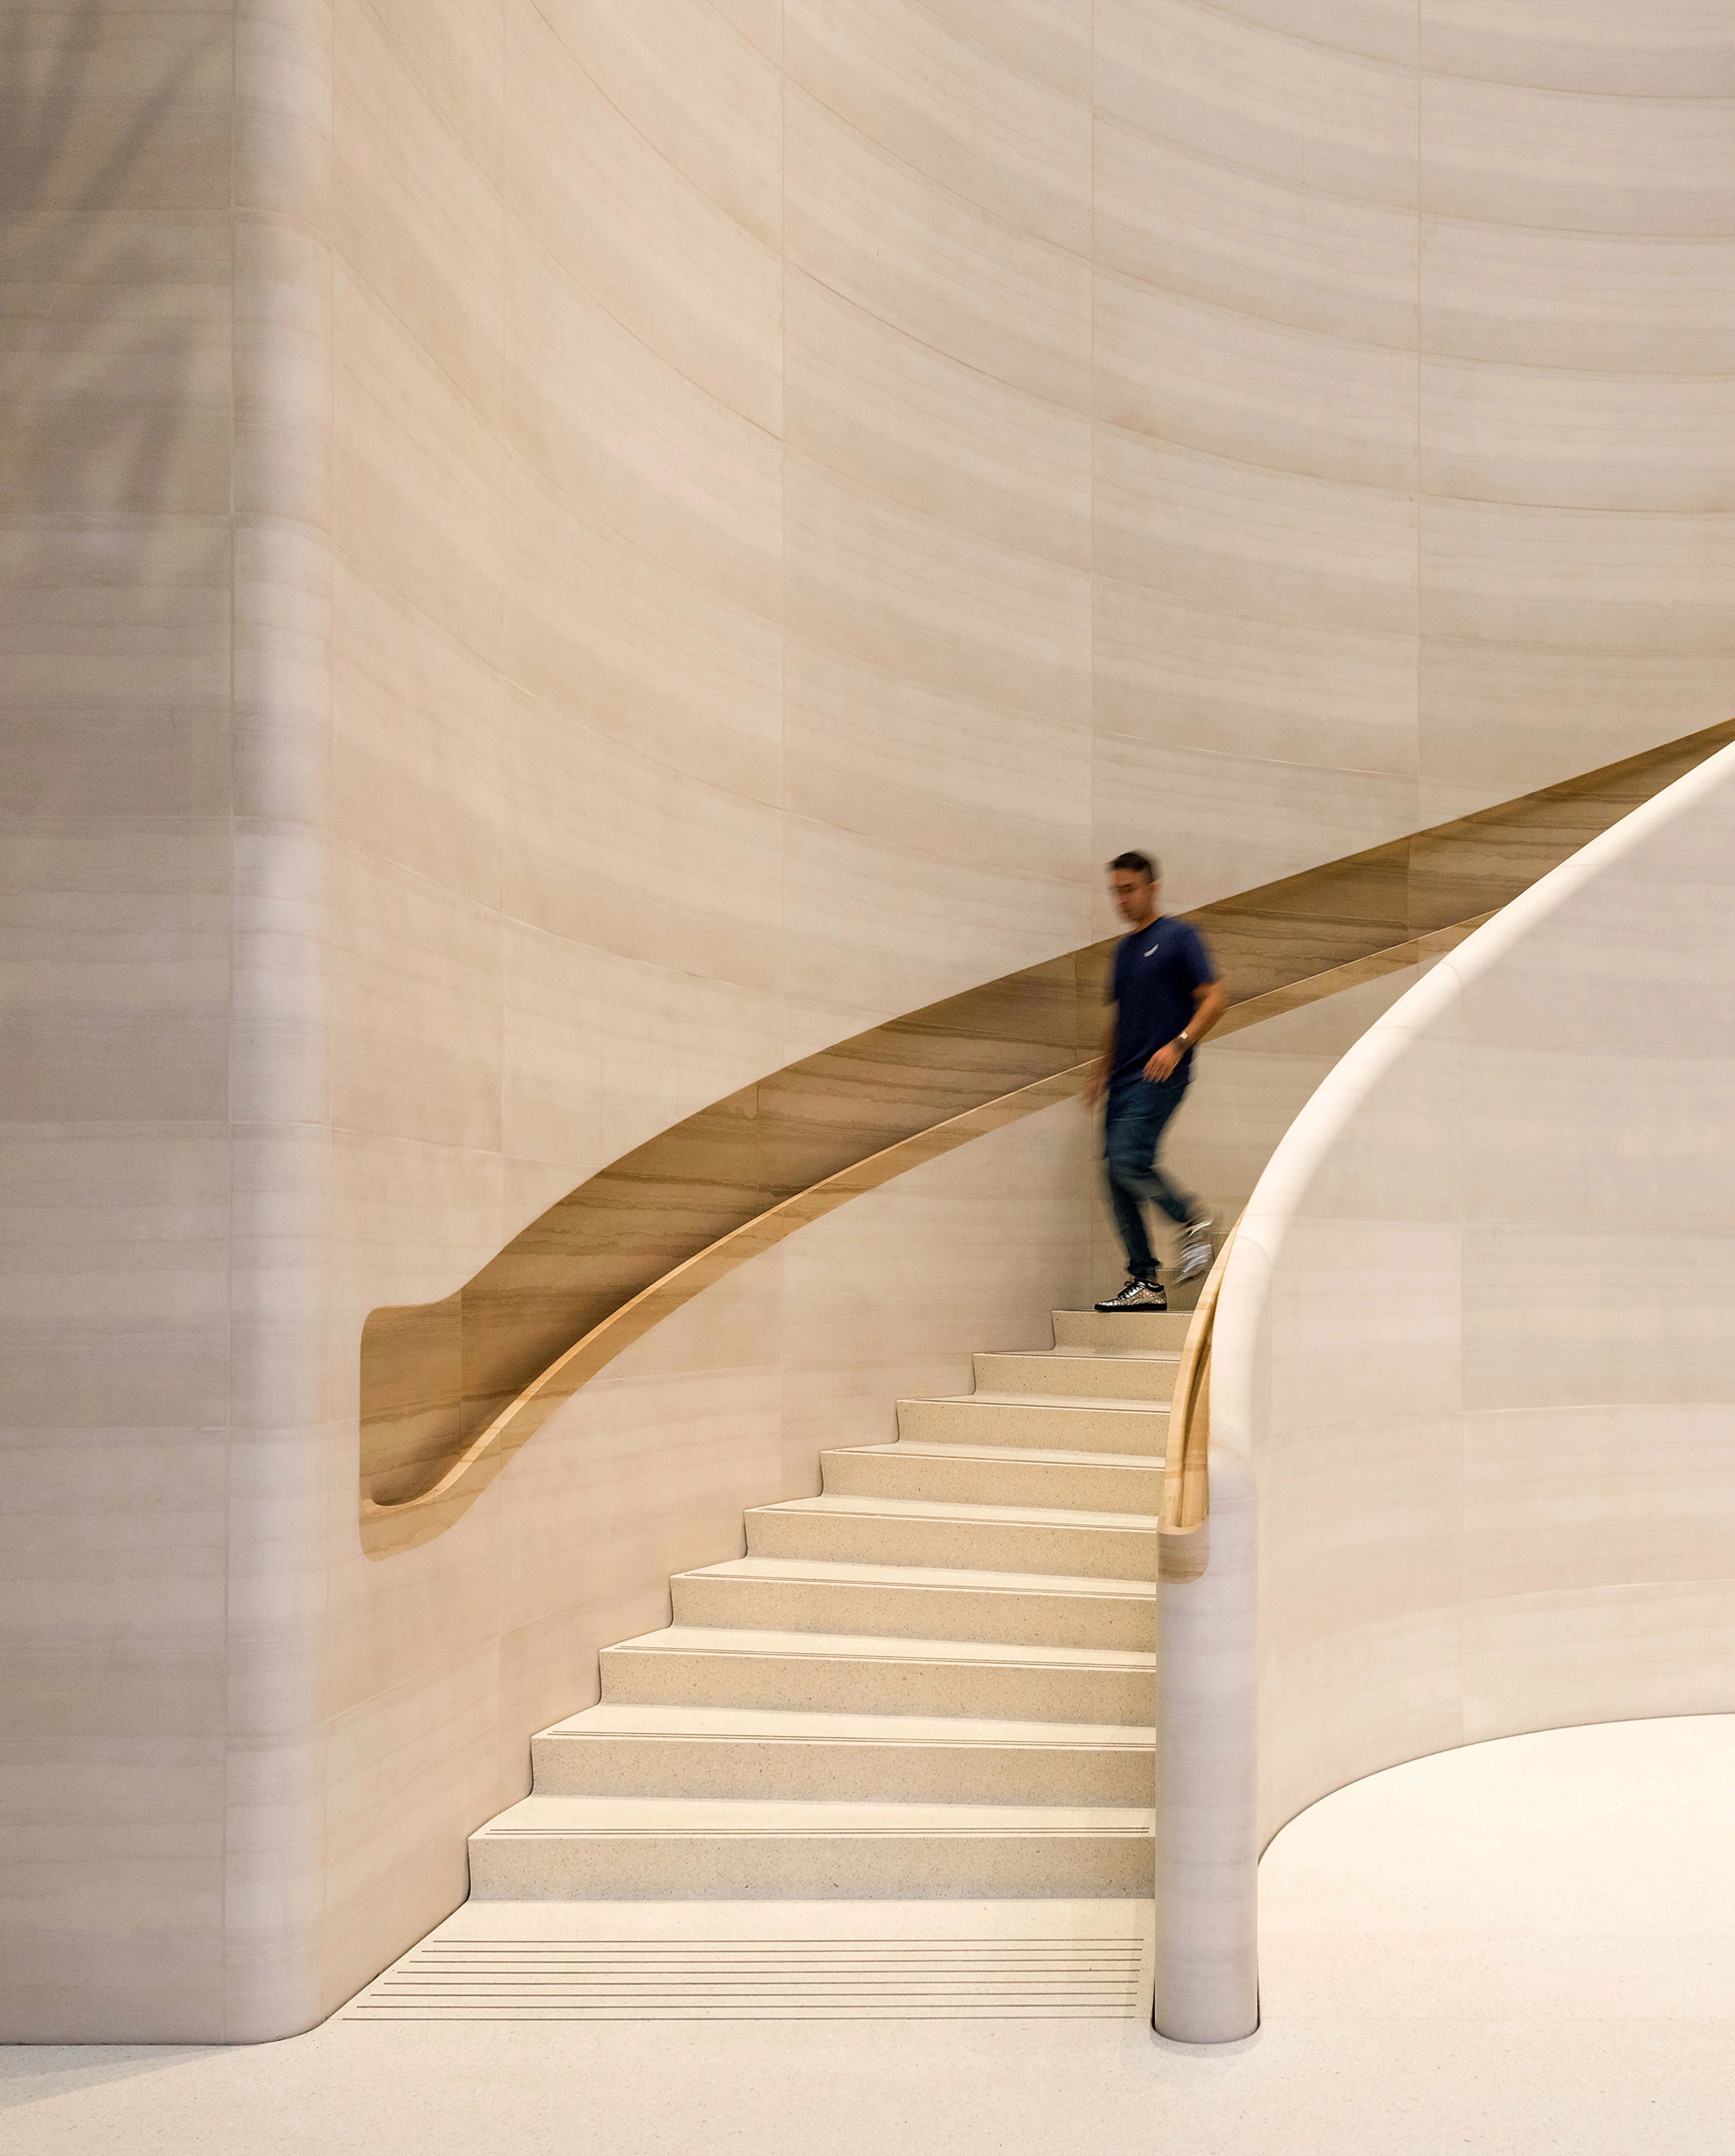 Apple's new Apple Store in Singapore is a work of art